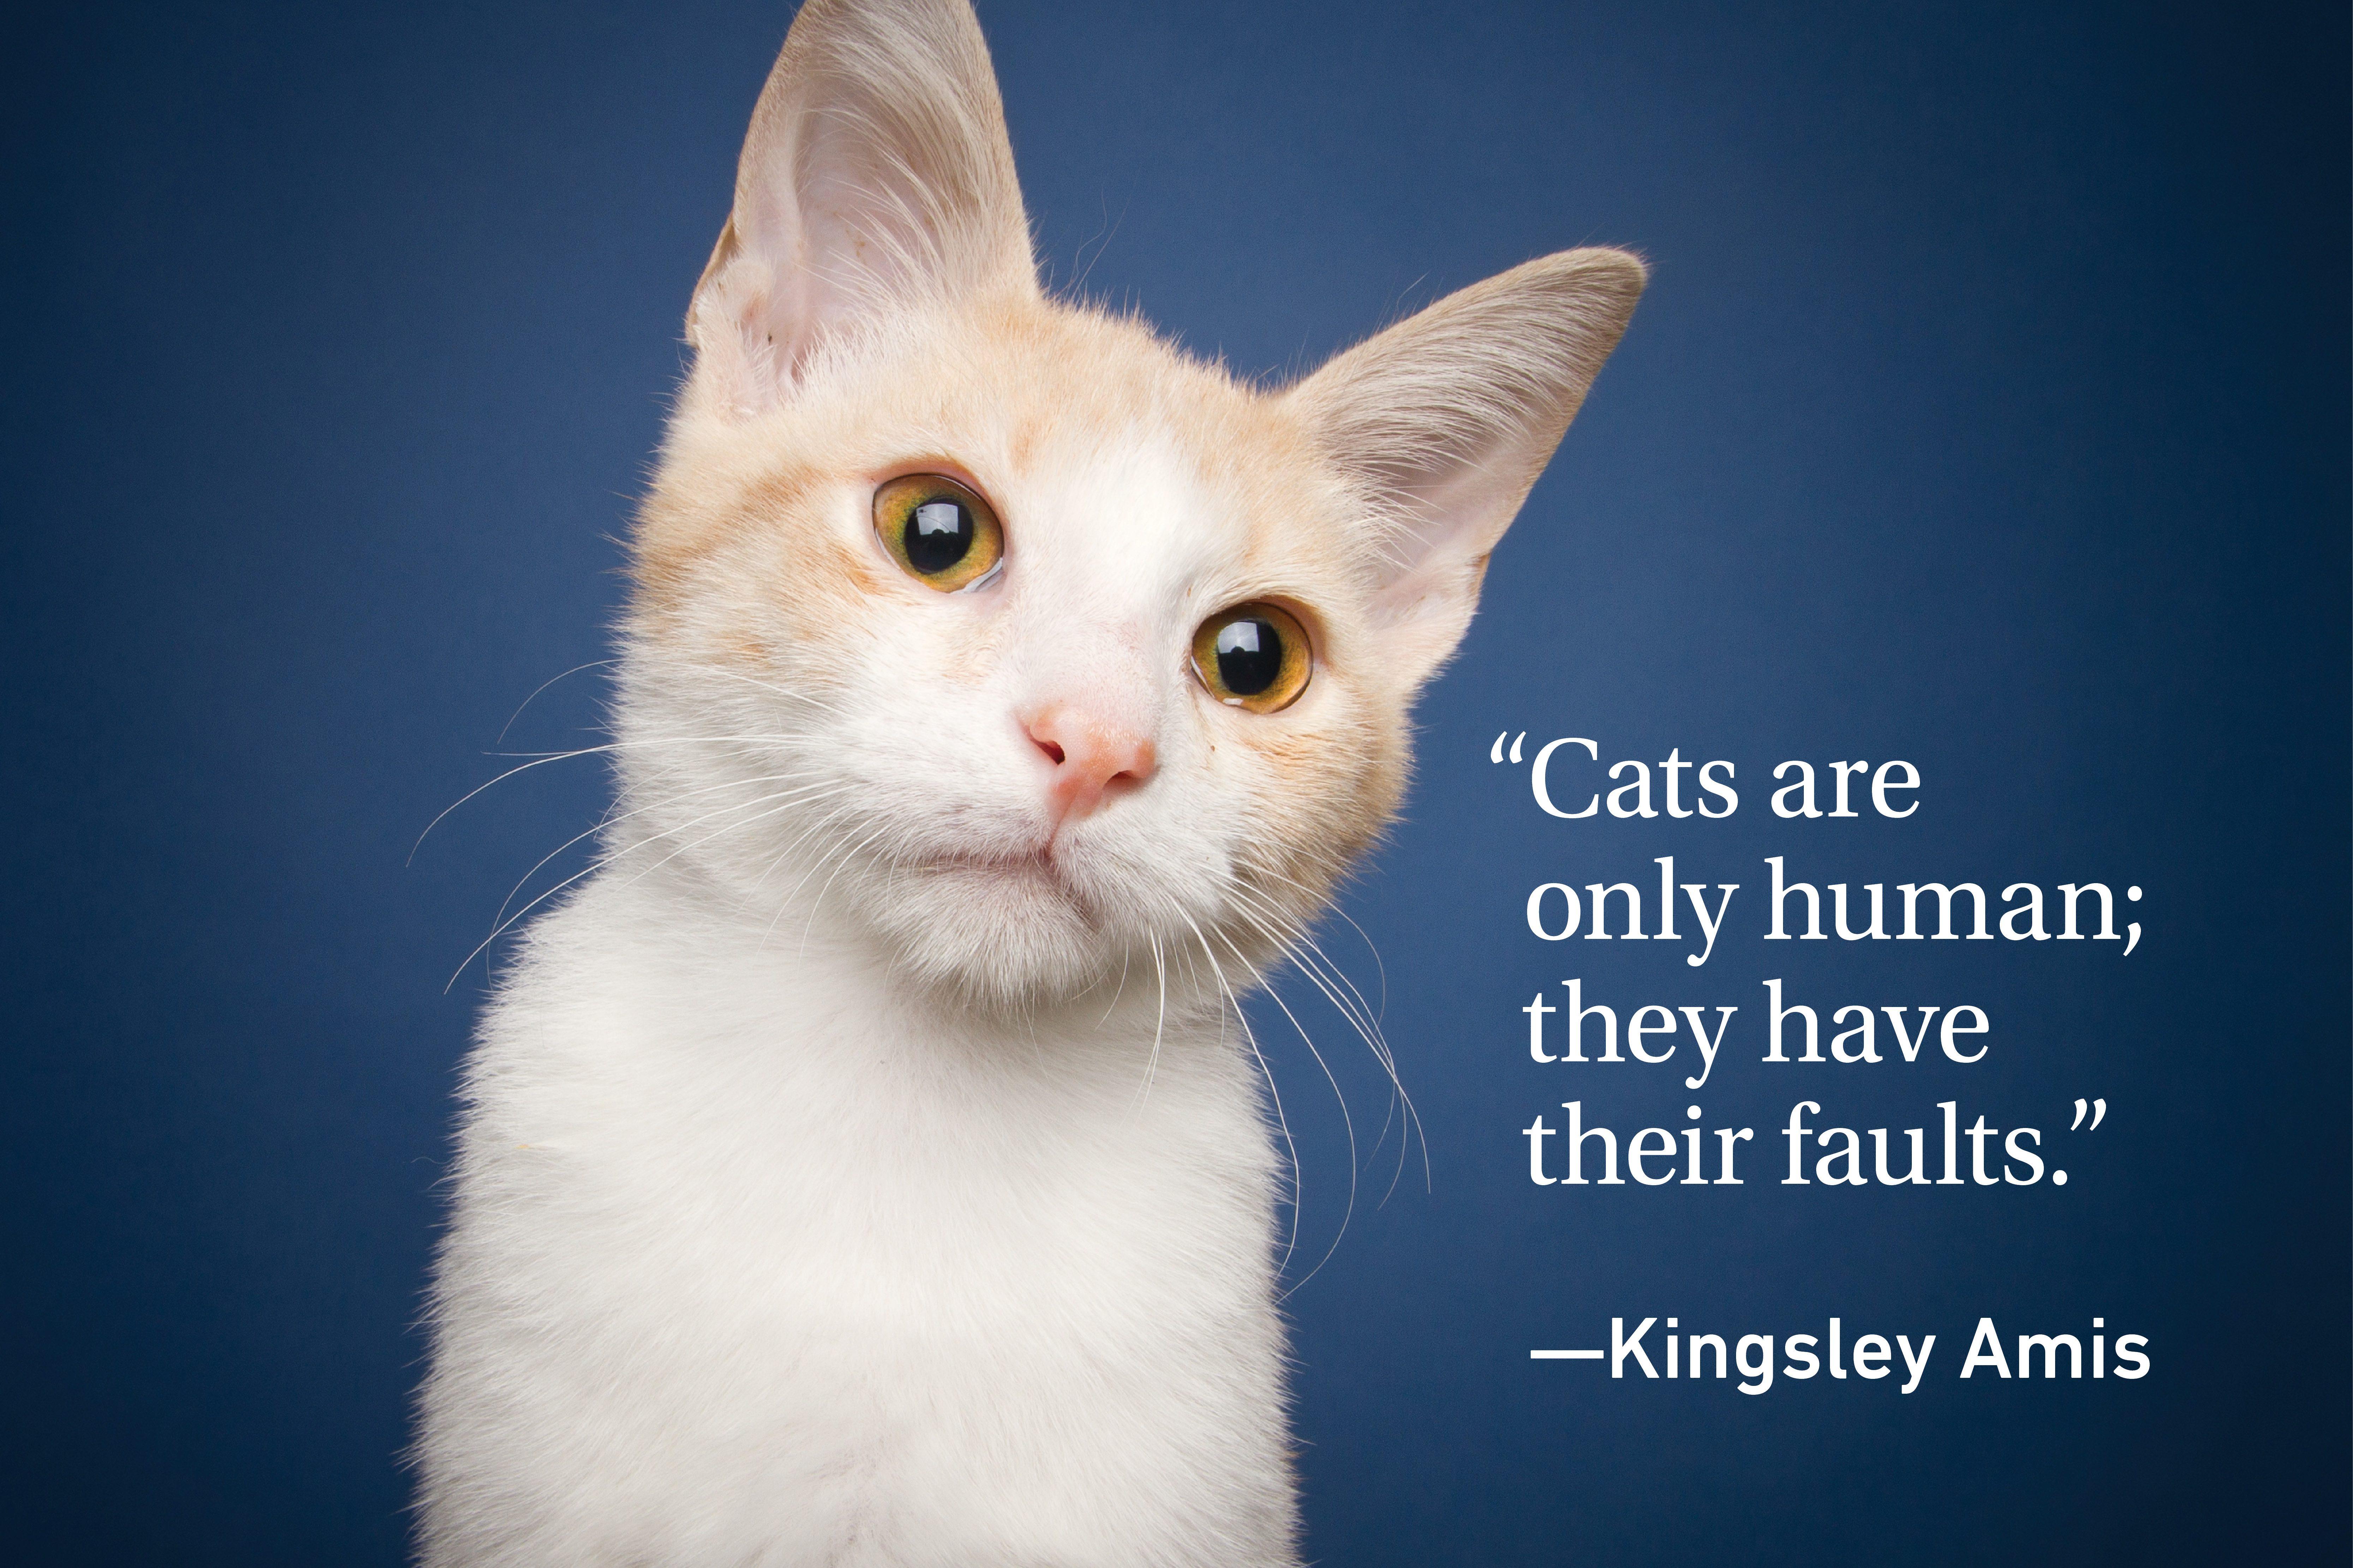 Cat Quotes Every Cat Owner Can Appreciate | Reader's Digest